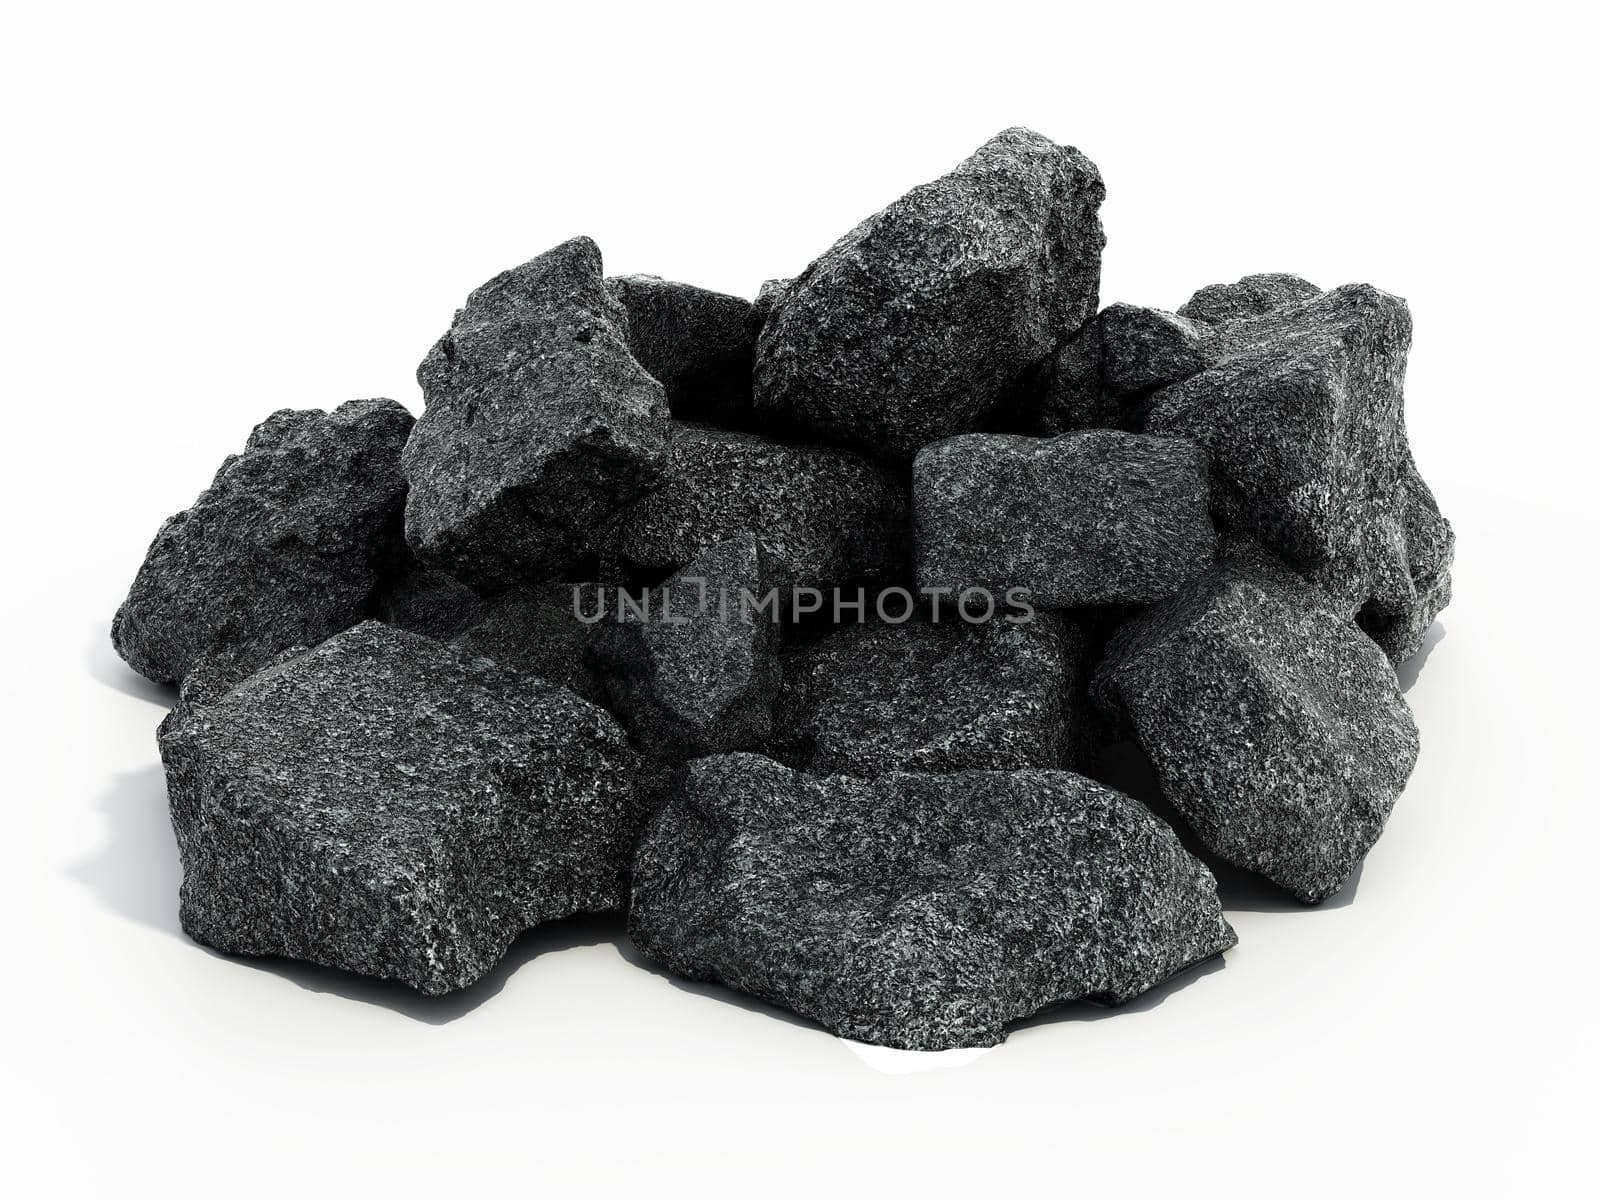 Group of stones isolated on white background. 3D illustration.